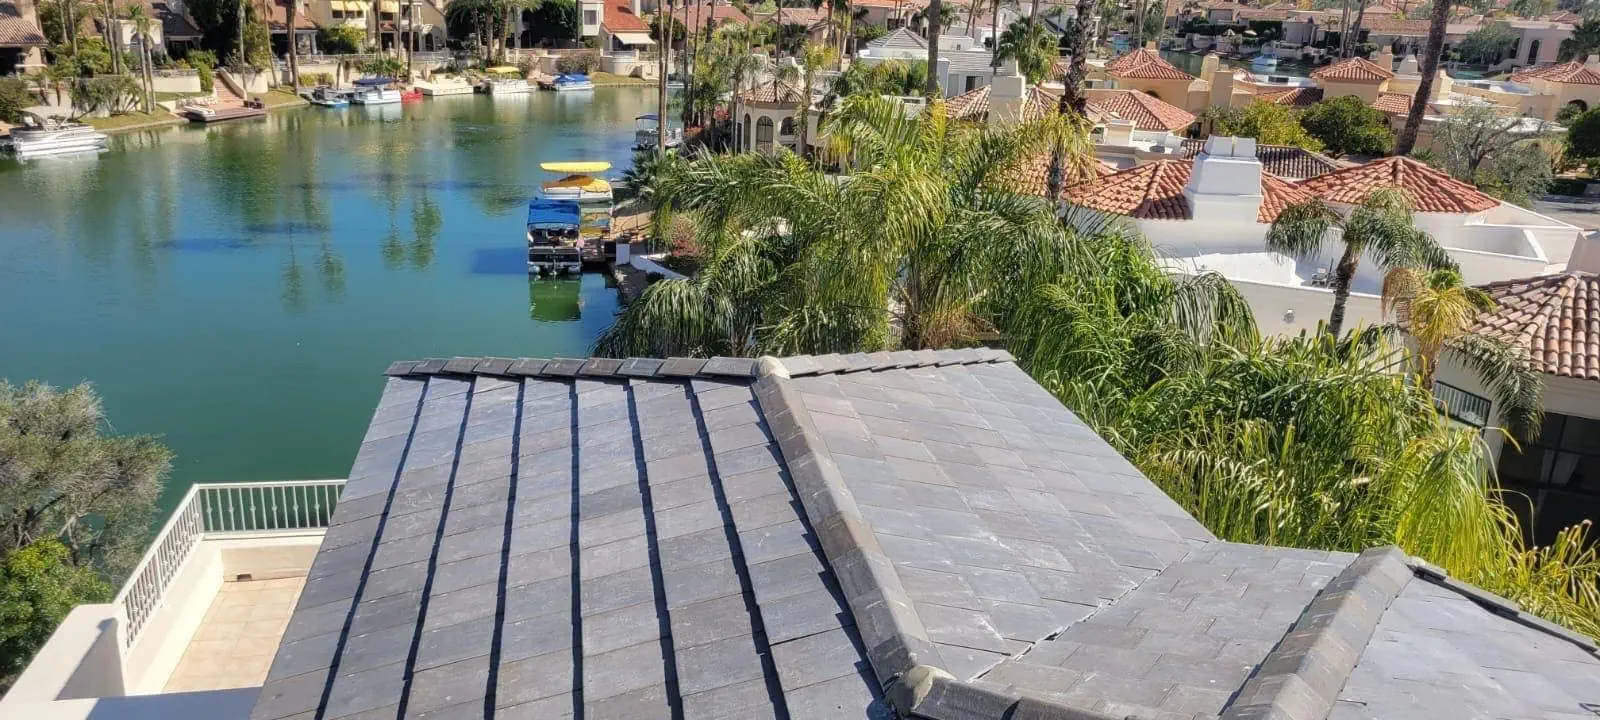 tile roof work done in fountain hills